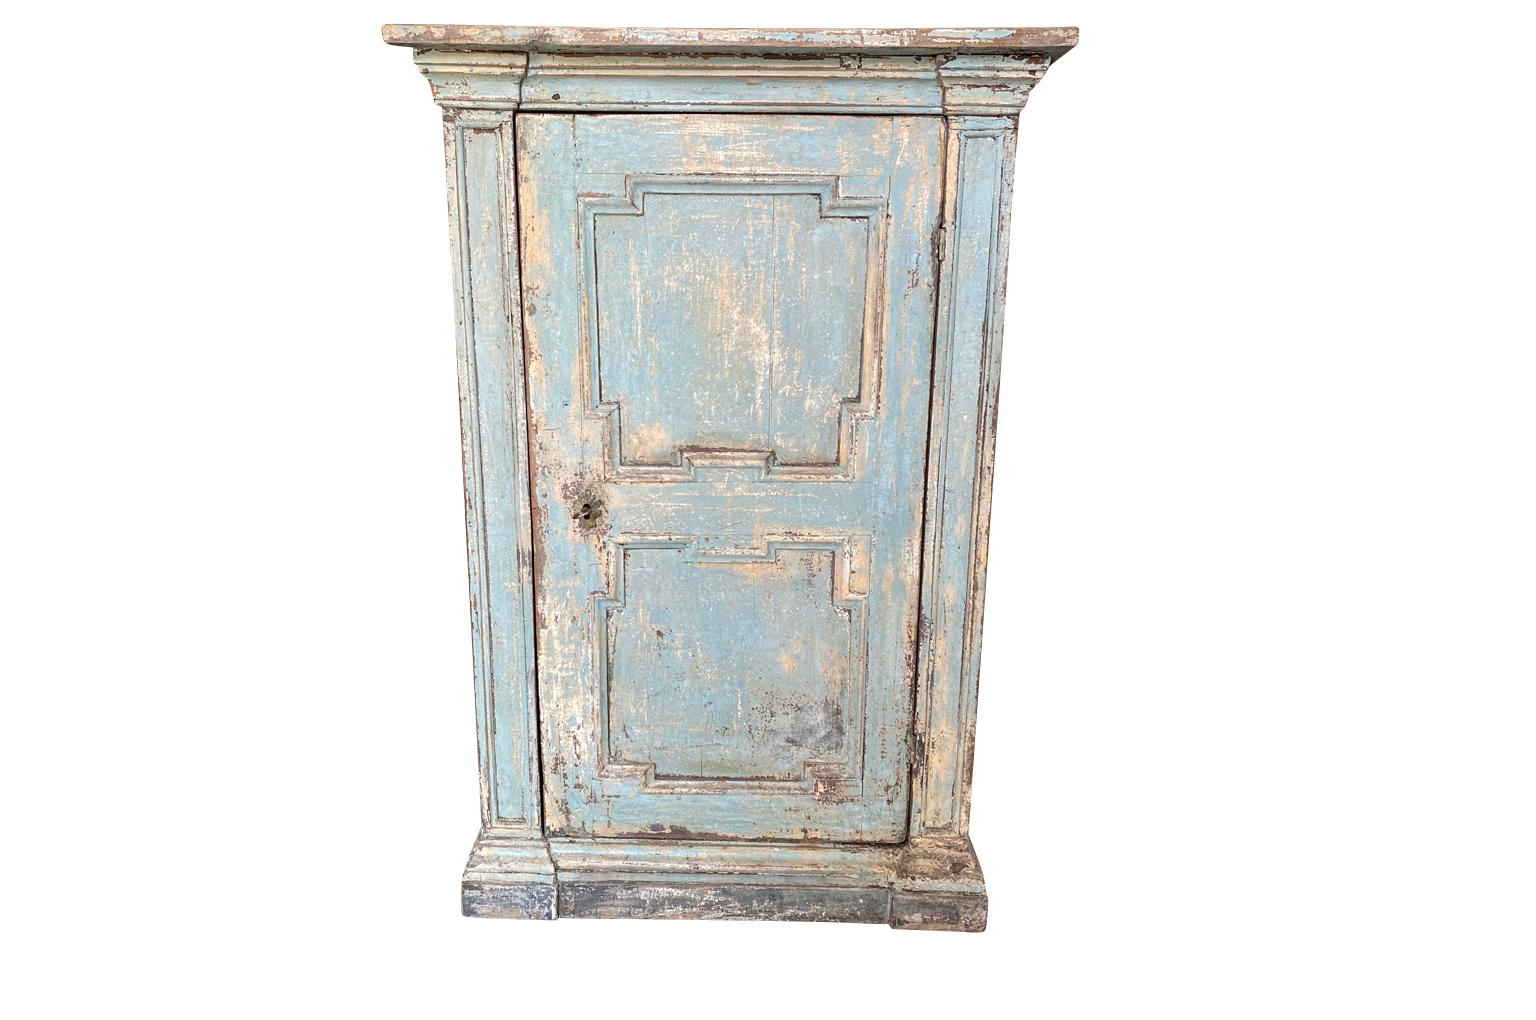 A very charming 18th century cabinet - Cupboard from the Tuscany region of Italy. Beautifully constructed from painted wood with a single door, interior shelf resting on a plinth base. Wonderful finish and patina.